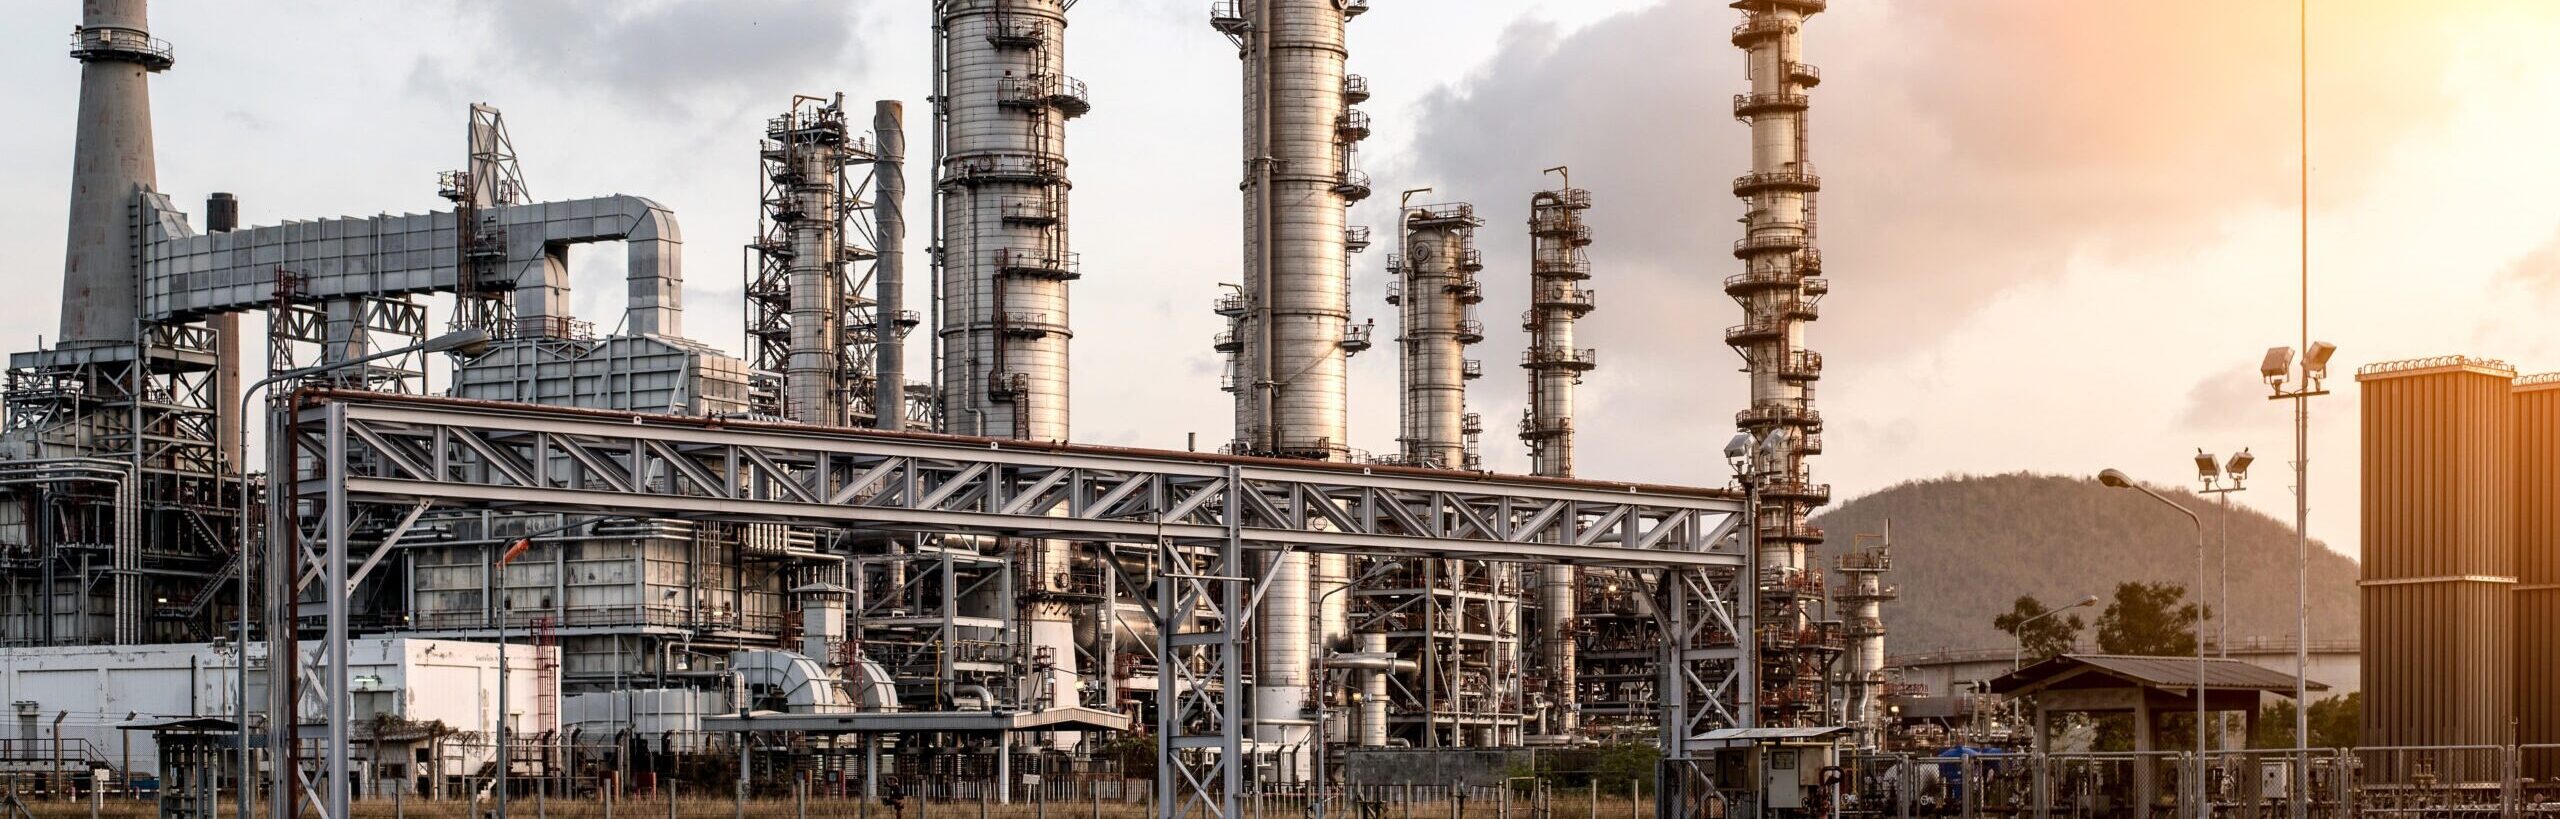 oil refinery in the petrochemical industry